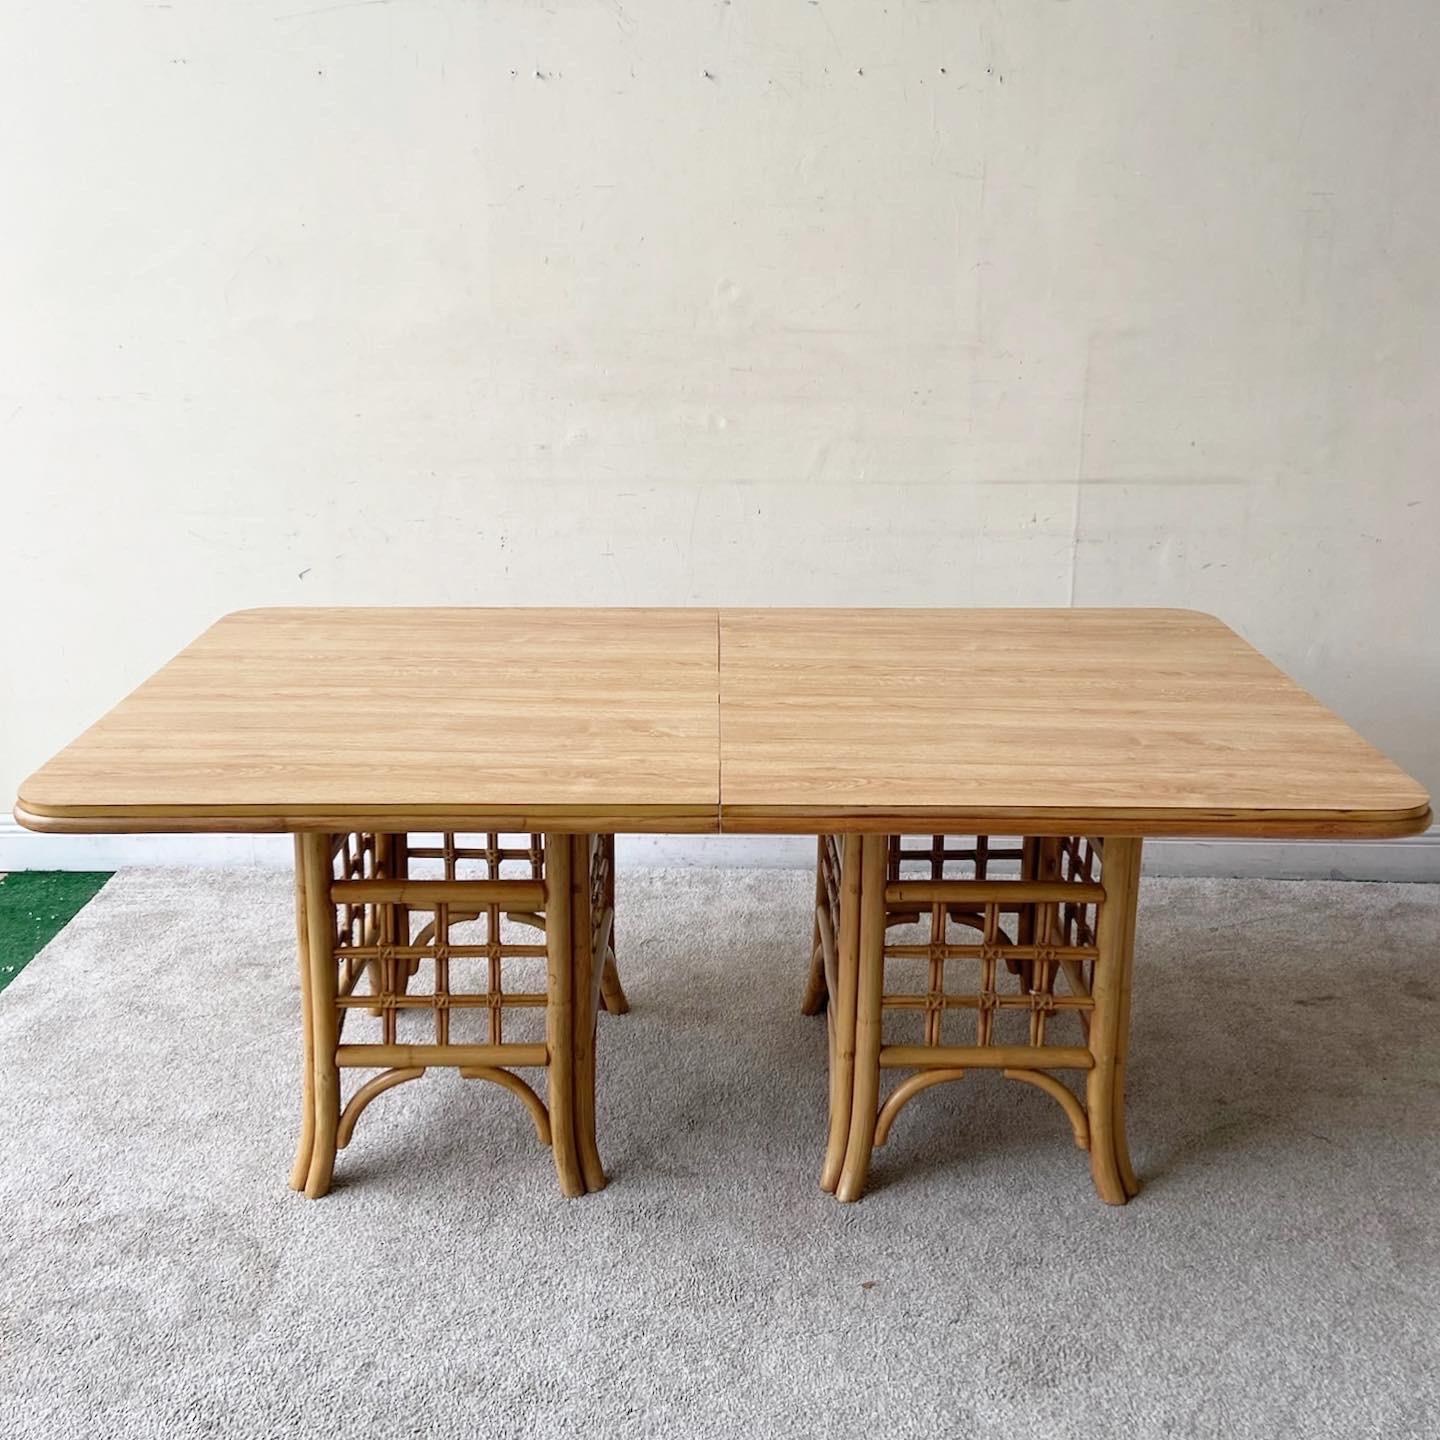 Exceptional vintage boho chic dining table. Features two bamboo rattan pedestals bases with a Woodgrain laminate top.
 